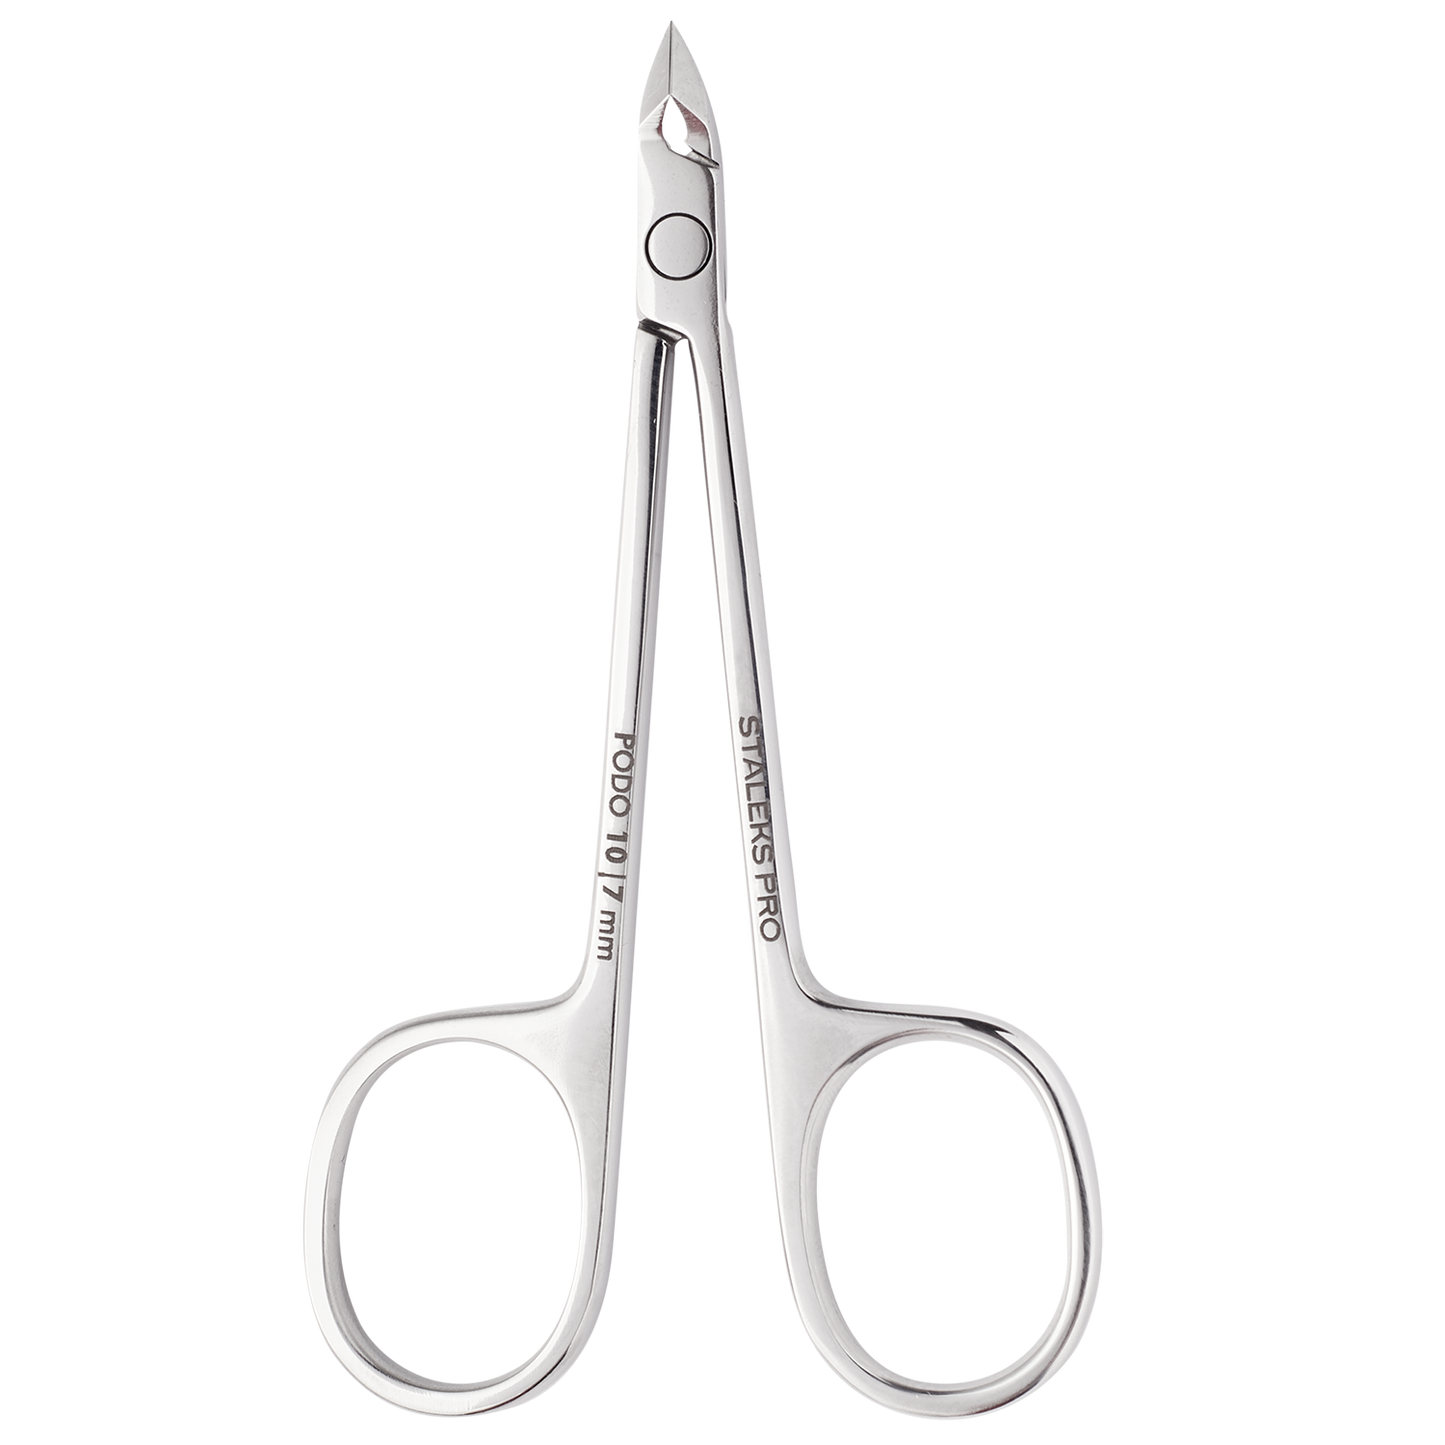 Staleks Pro Podo 10 Nippers For Pedicure 7MM NP-10-7